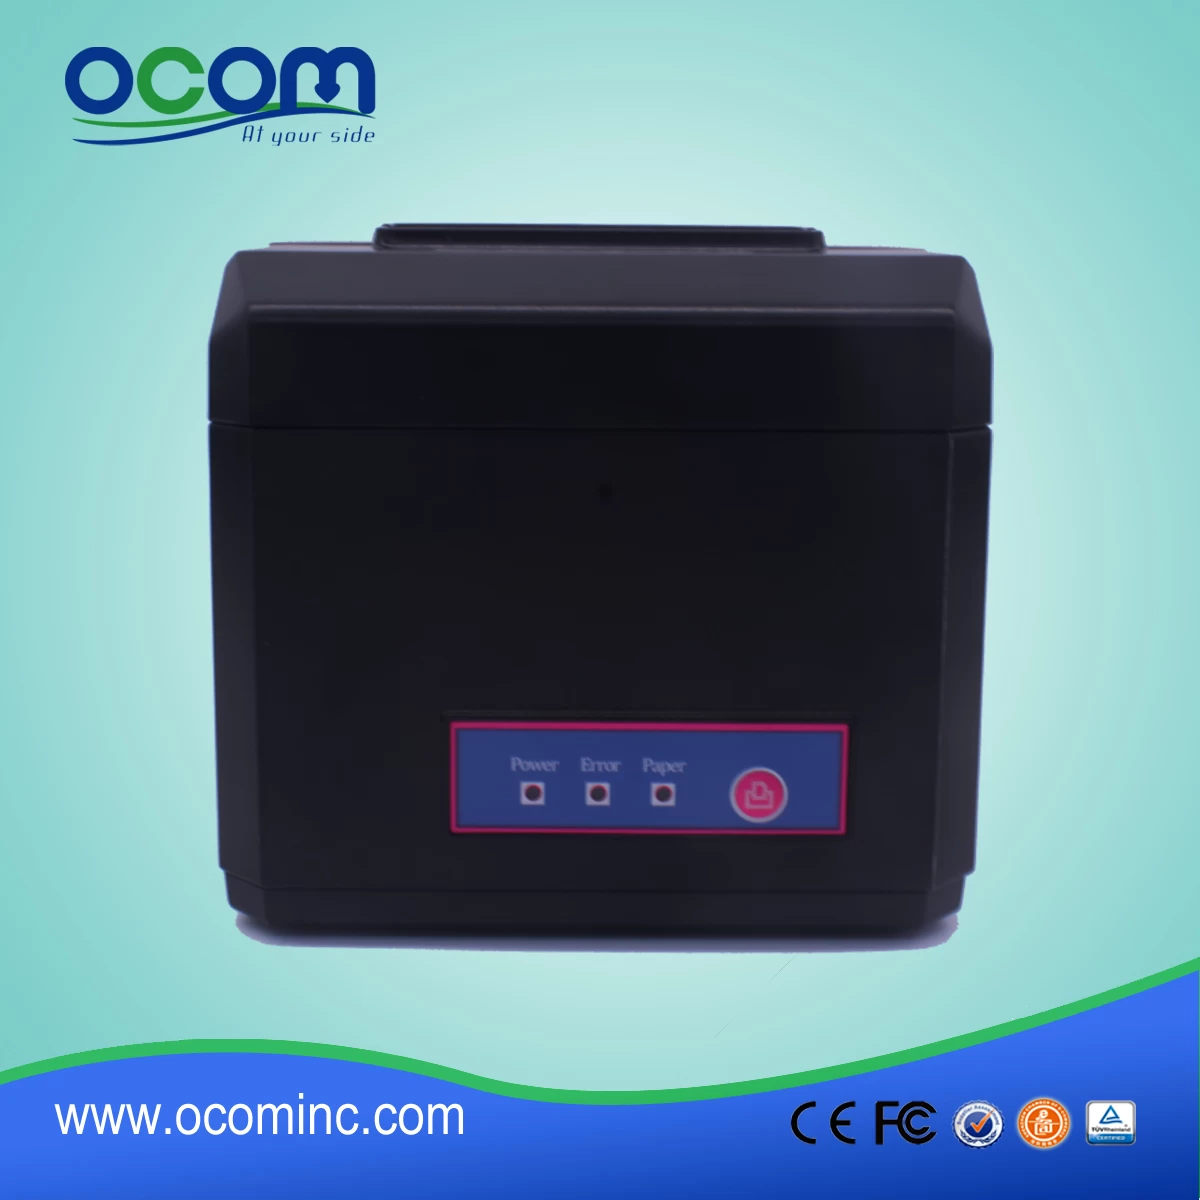 (OCPP-80F) 80mm thermal receipt printer support Bluetooth and WIFI